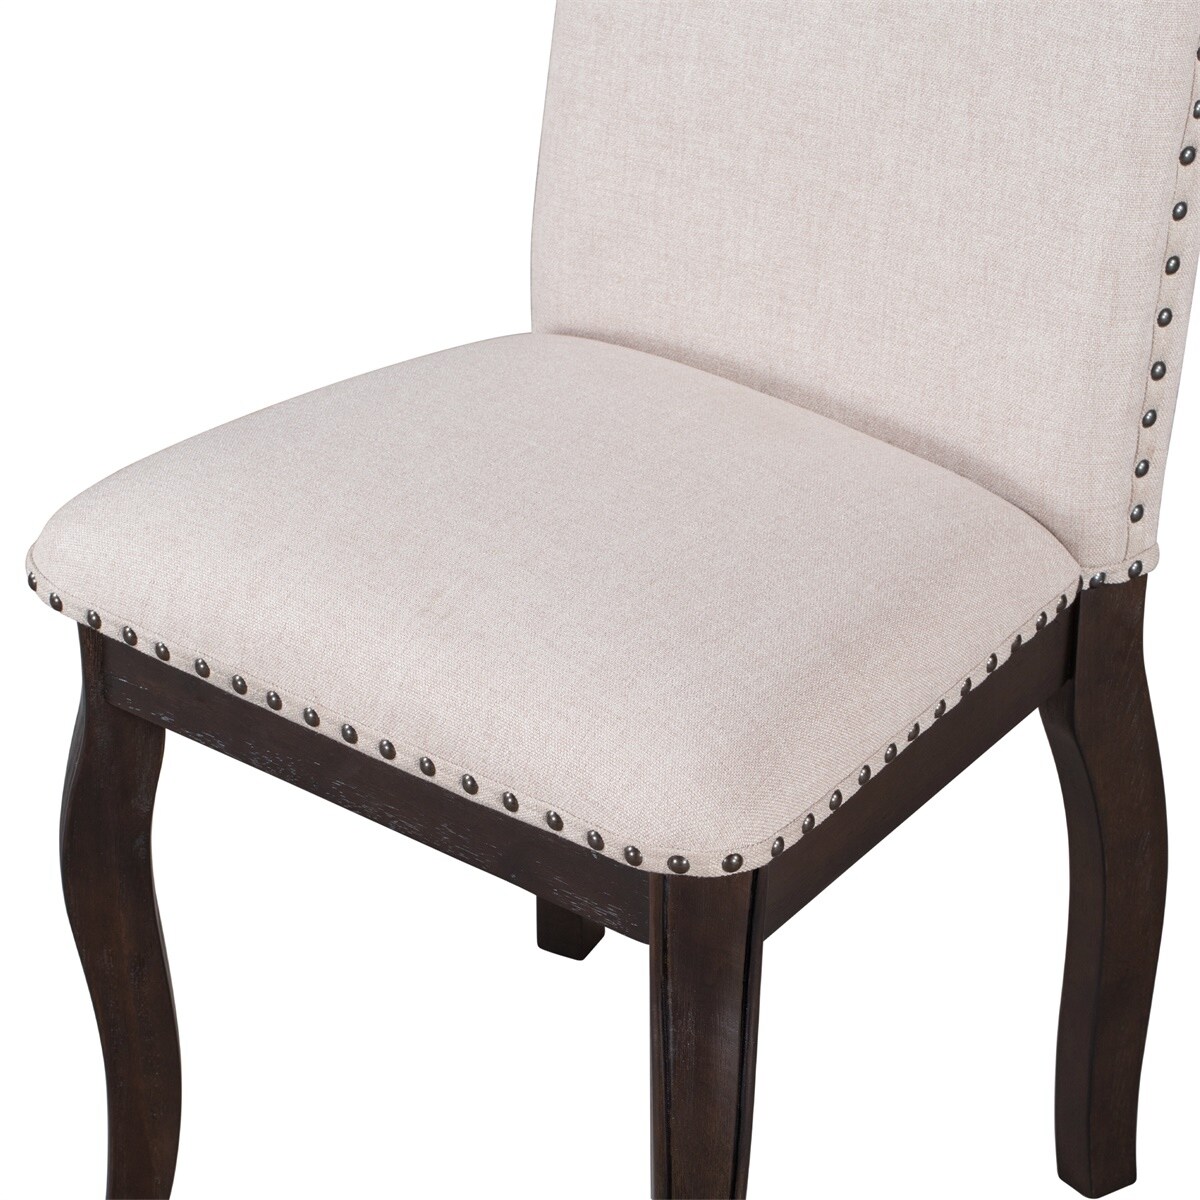 Merax Wood Upholstered Fabirc Dining Chairs with Nailhead(Set of 4)